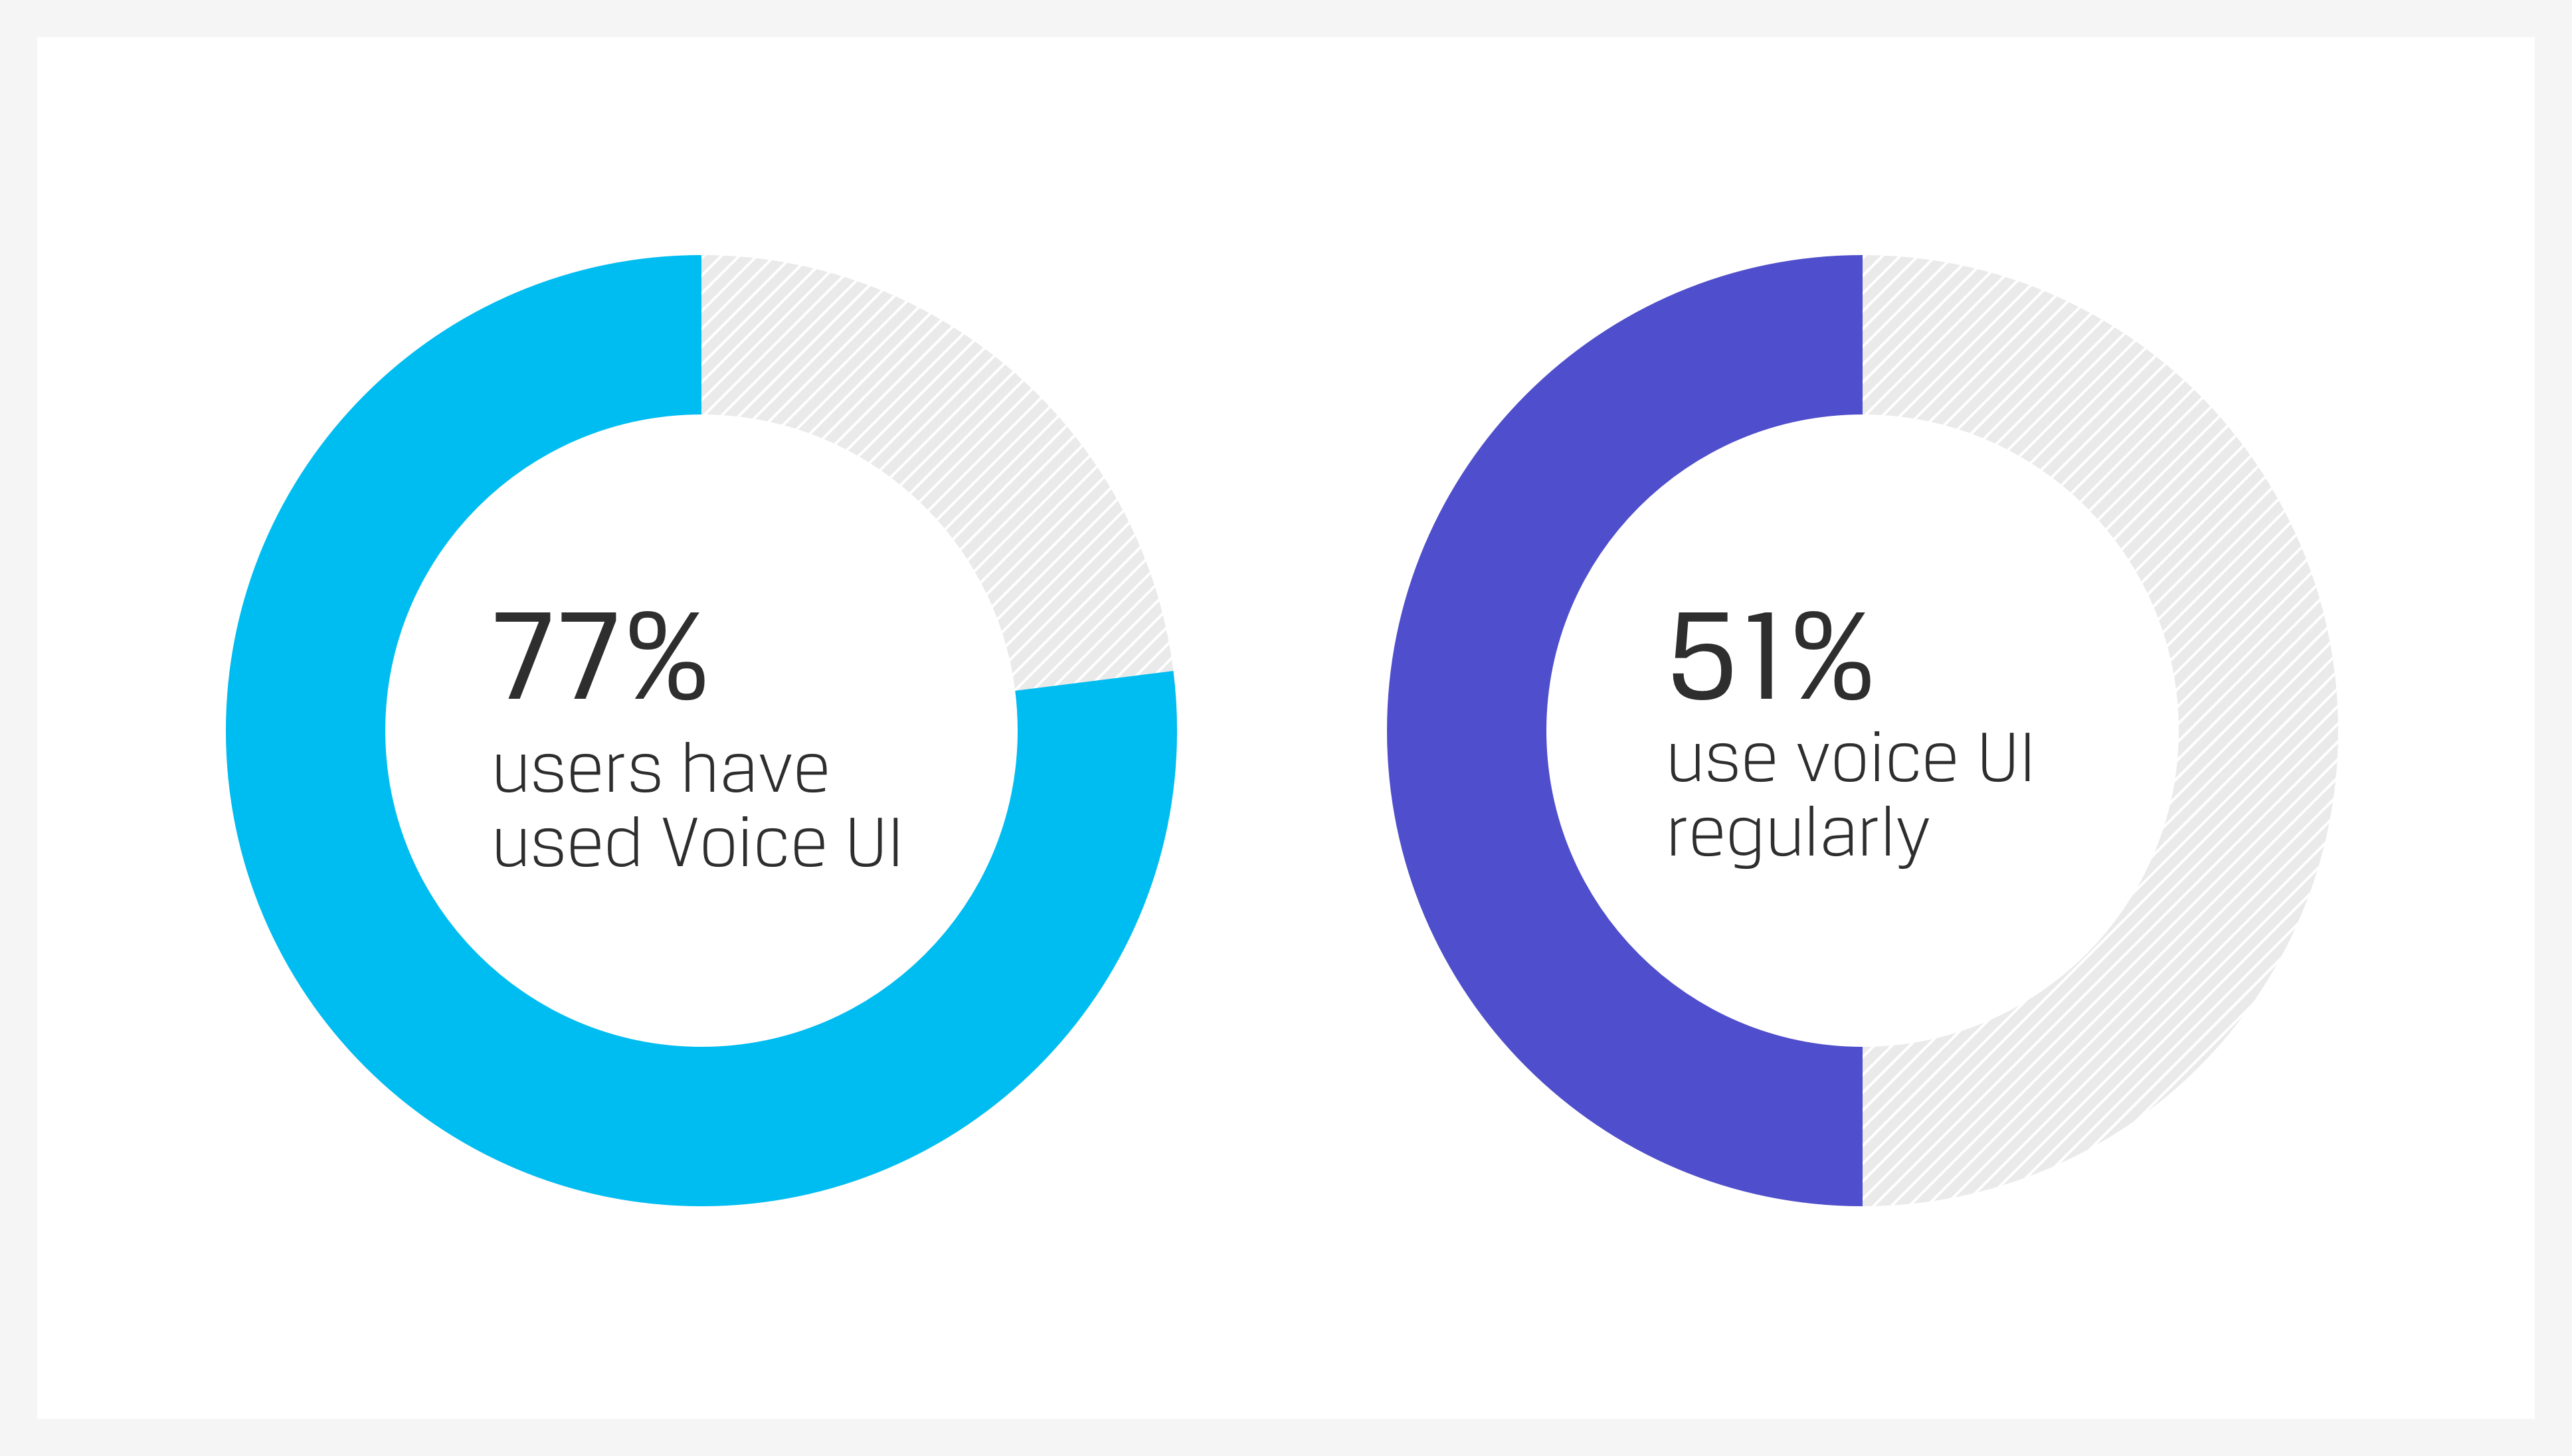 Percentage of user who have used voice user interface VUI